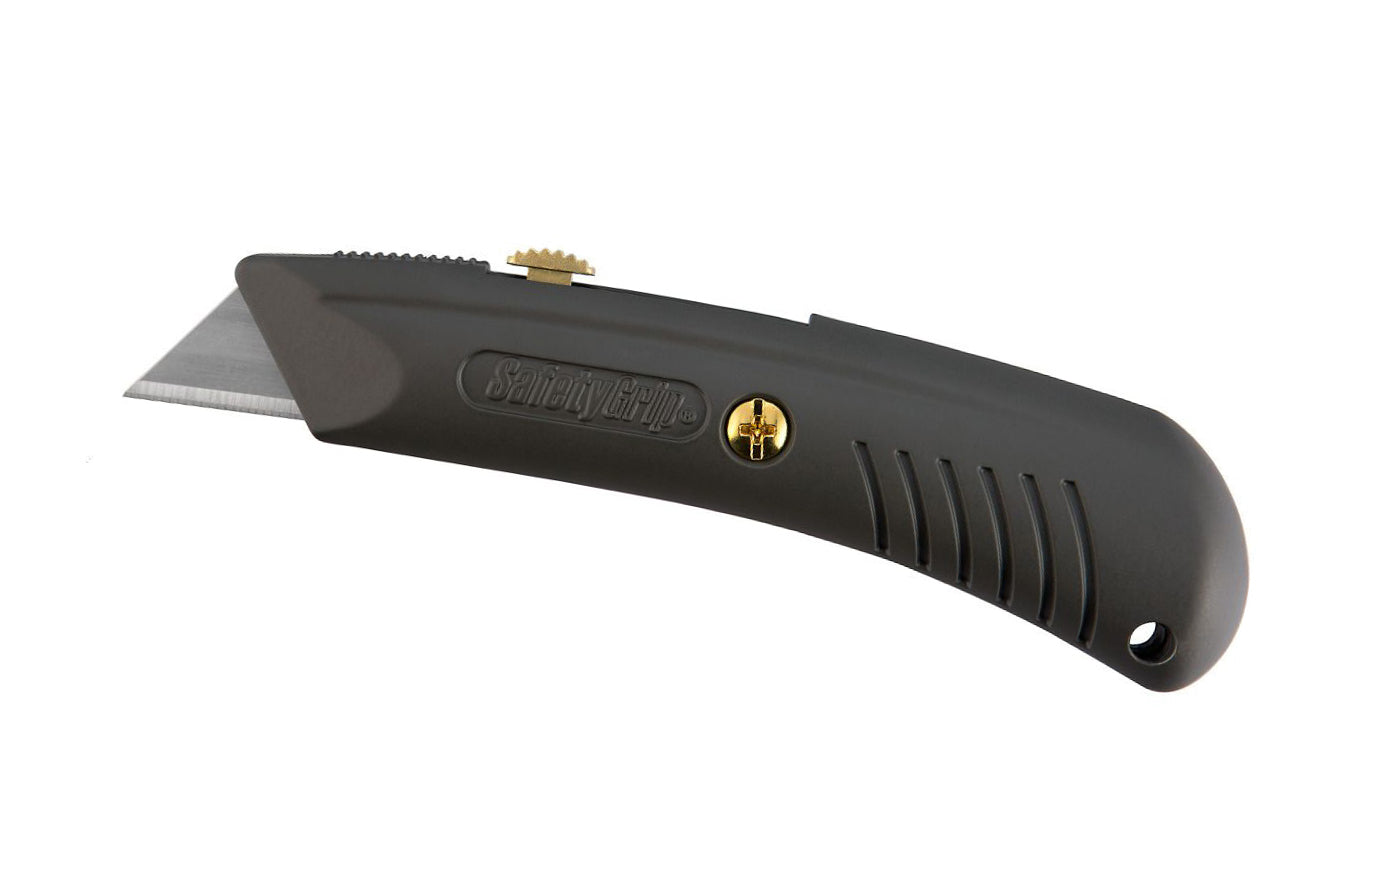 This all-purpose RSG Retractable Metal Utility Knife is lightweight & ergonomically designed. Knife features an over lock nose for added blade stability & a non-slip grip surface. Cutter has three blade depth settings & can hold five additional blades inside. Gray color. 6" overall length. PHC - Pacific Handy Cutter.